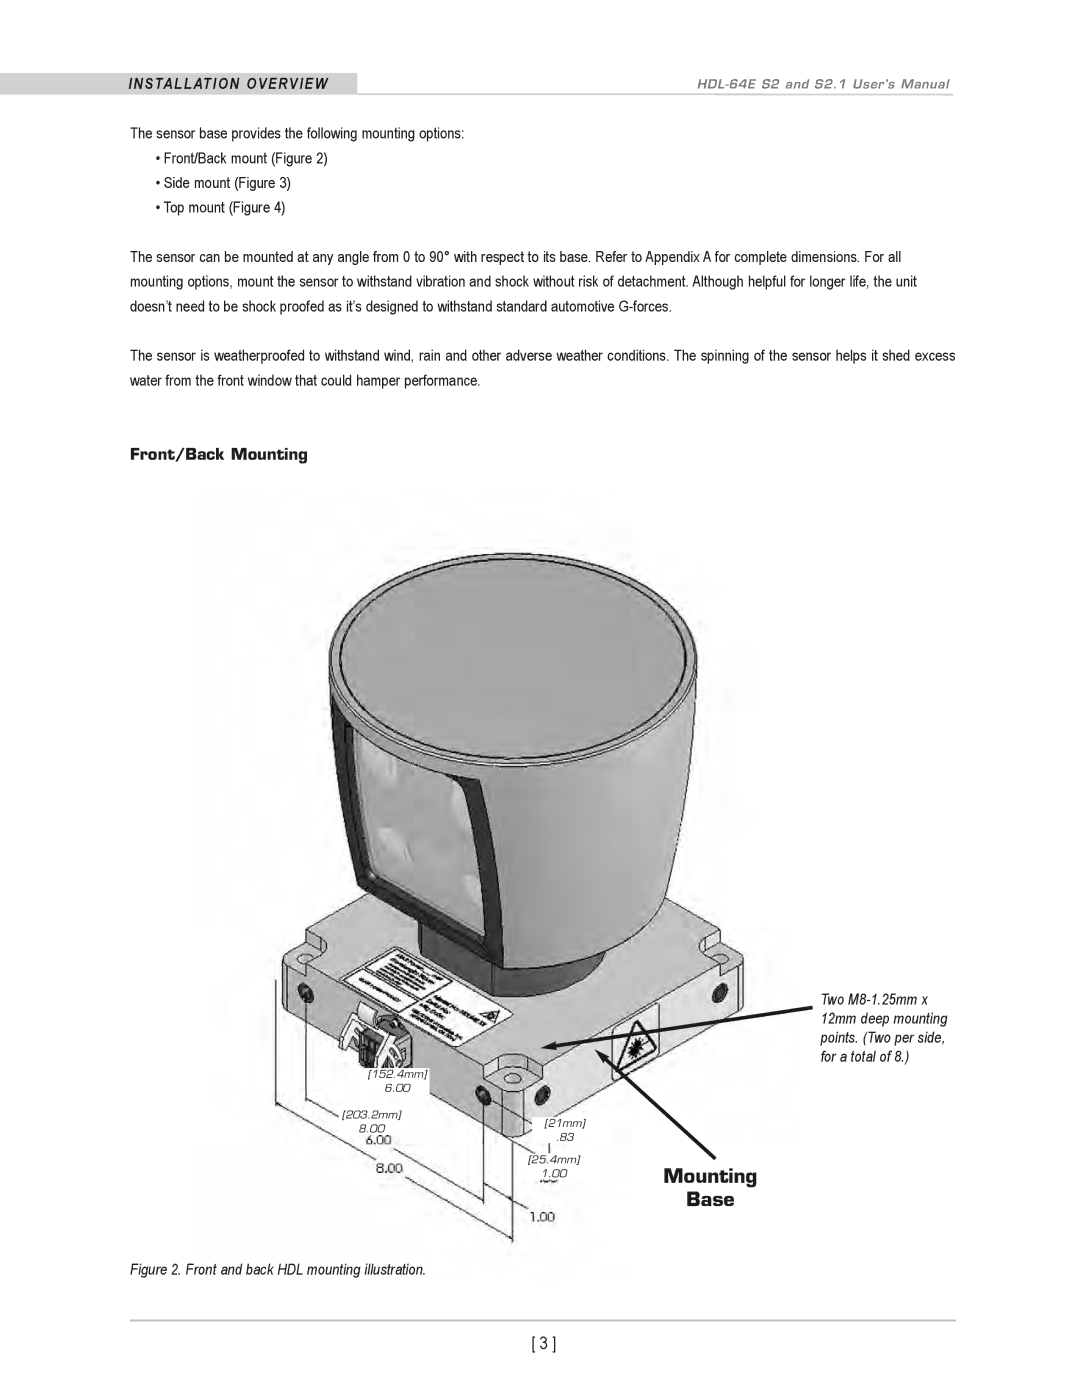 Velodyne Acoustics HDL-64E S2.1 user manual InstaLLation oVerVieW, Front/Back Mounting 